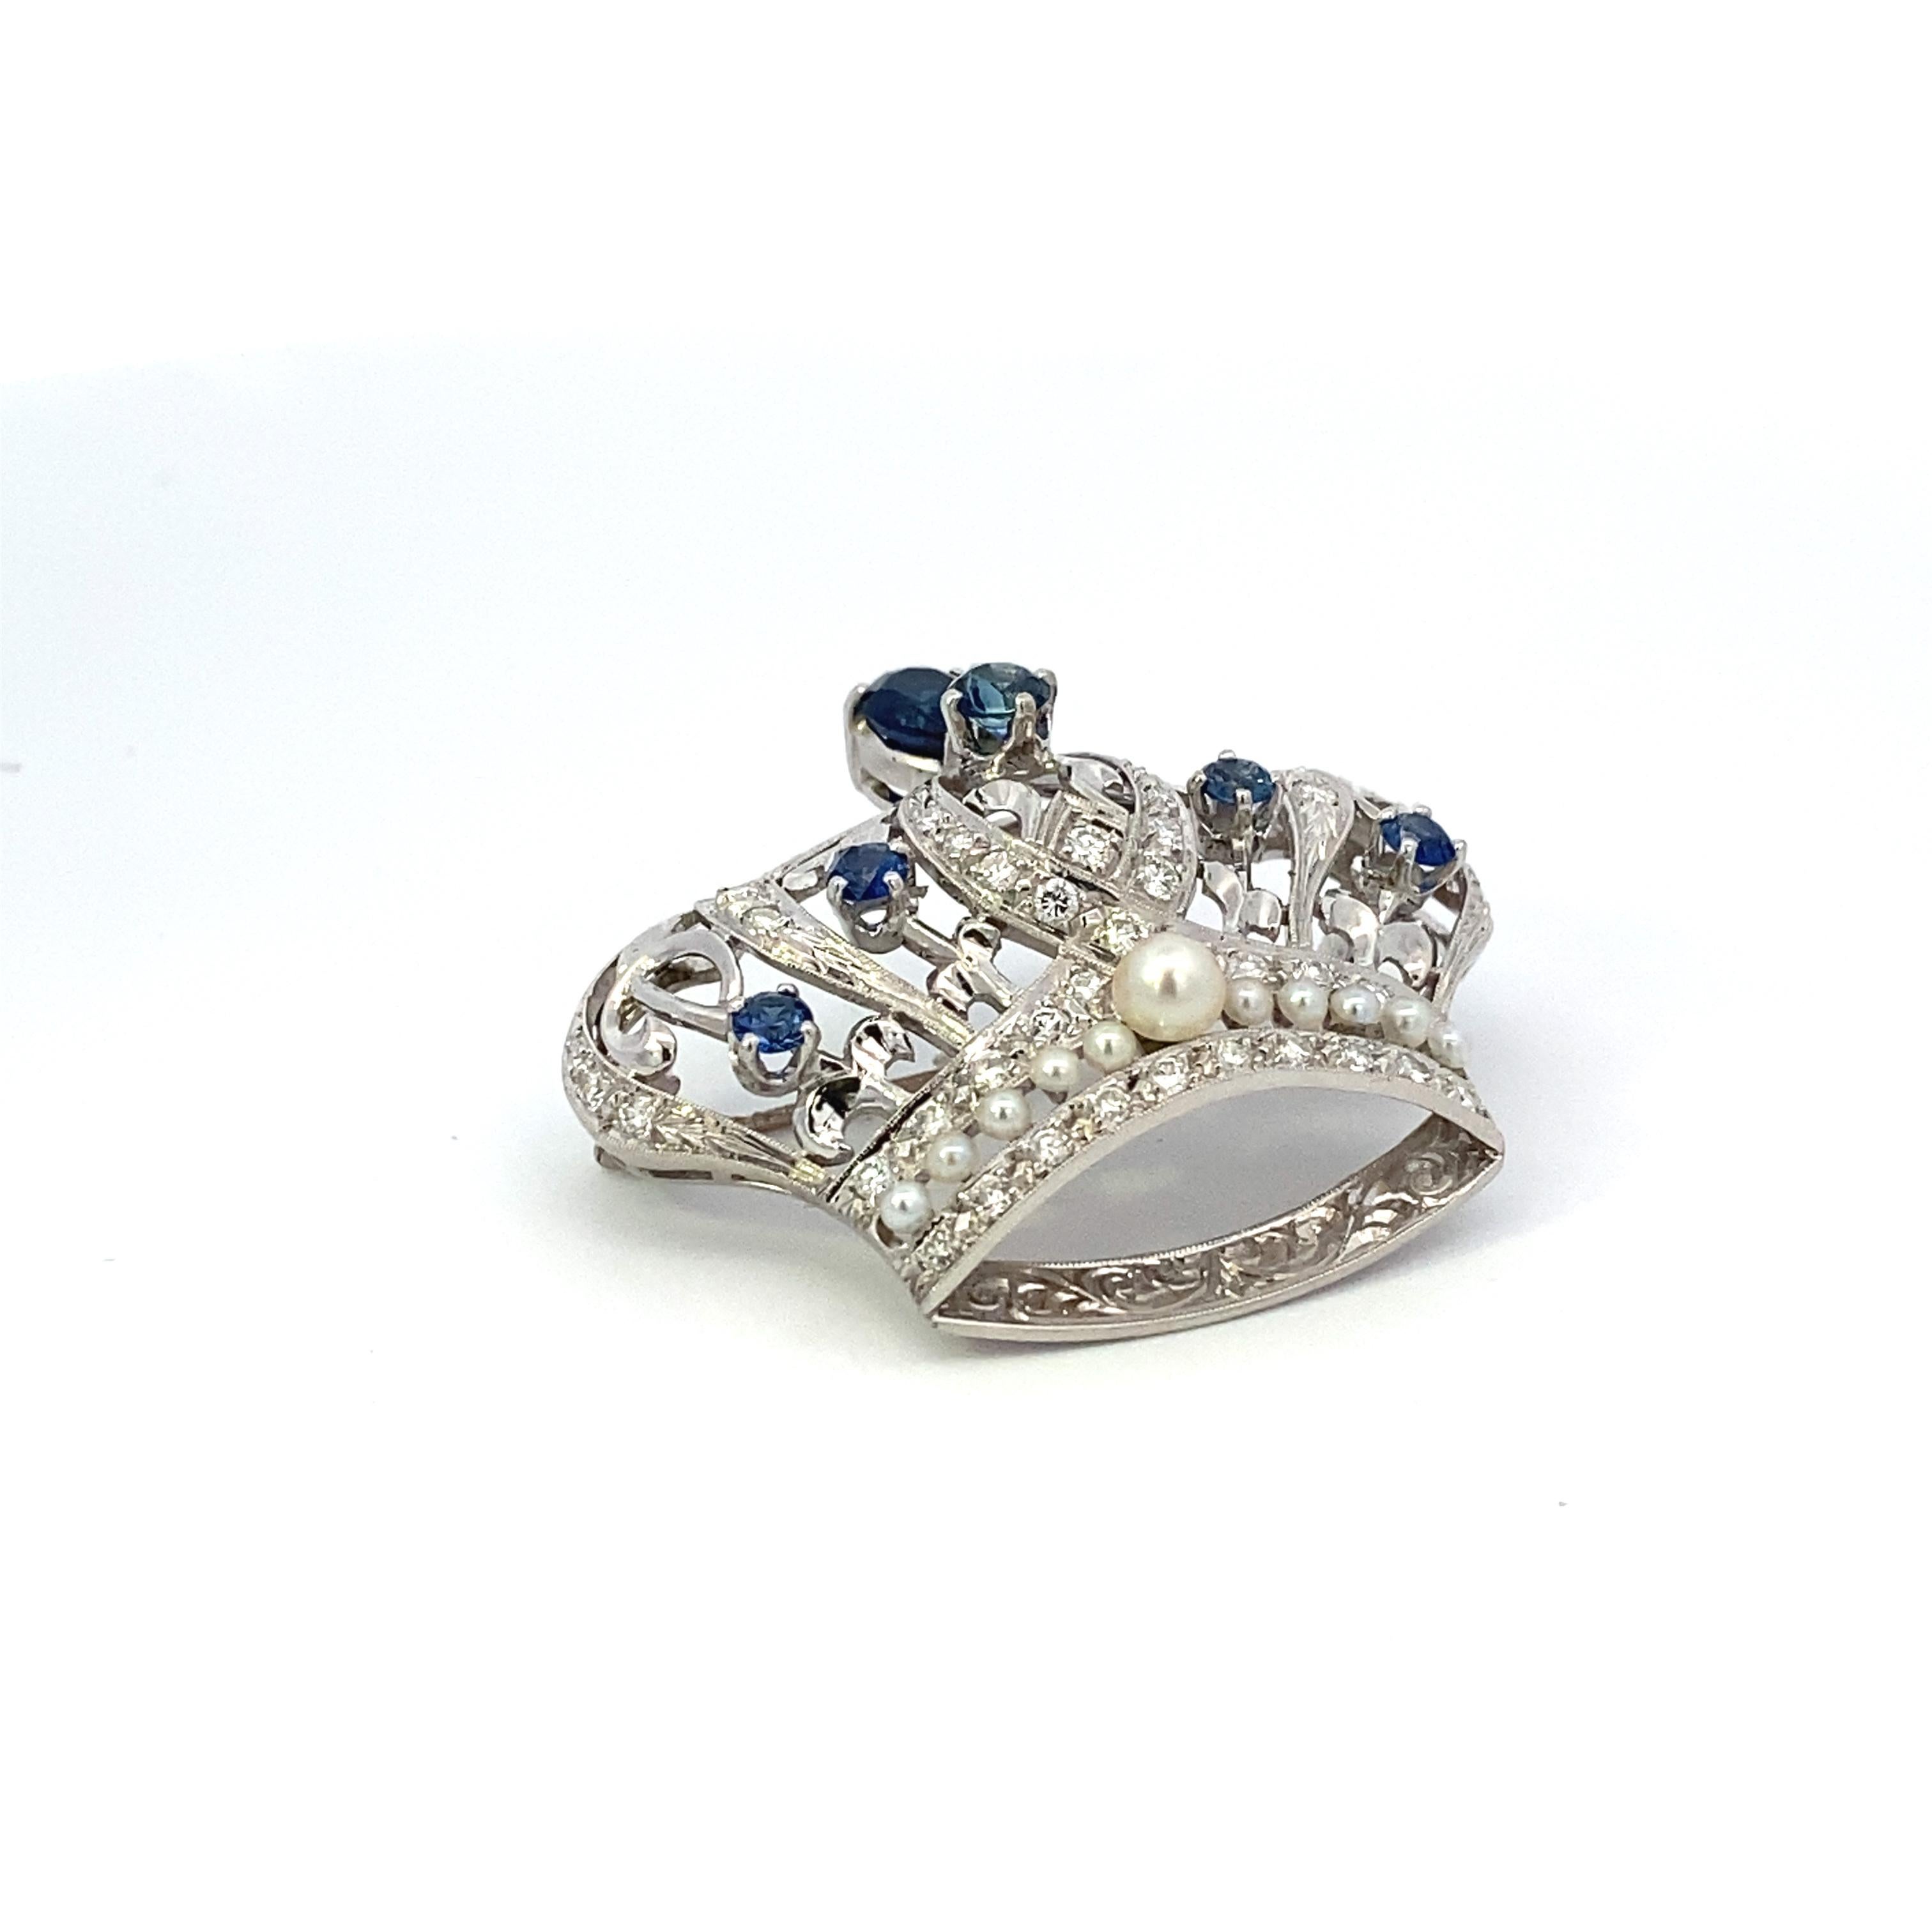 Pear Cut Edwardian-Styled Platinum Crown Brooch with Sapphires, Diamonds and Pearls